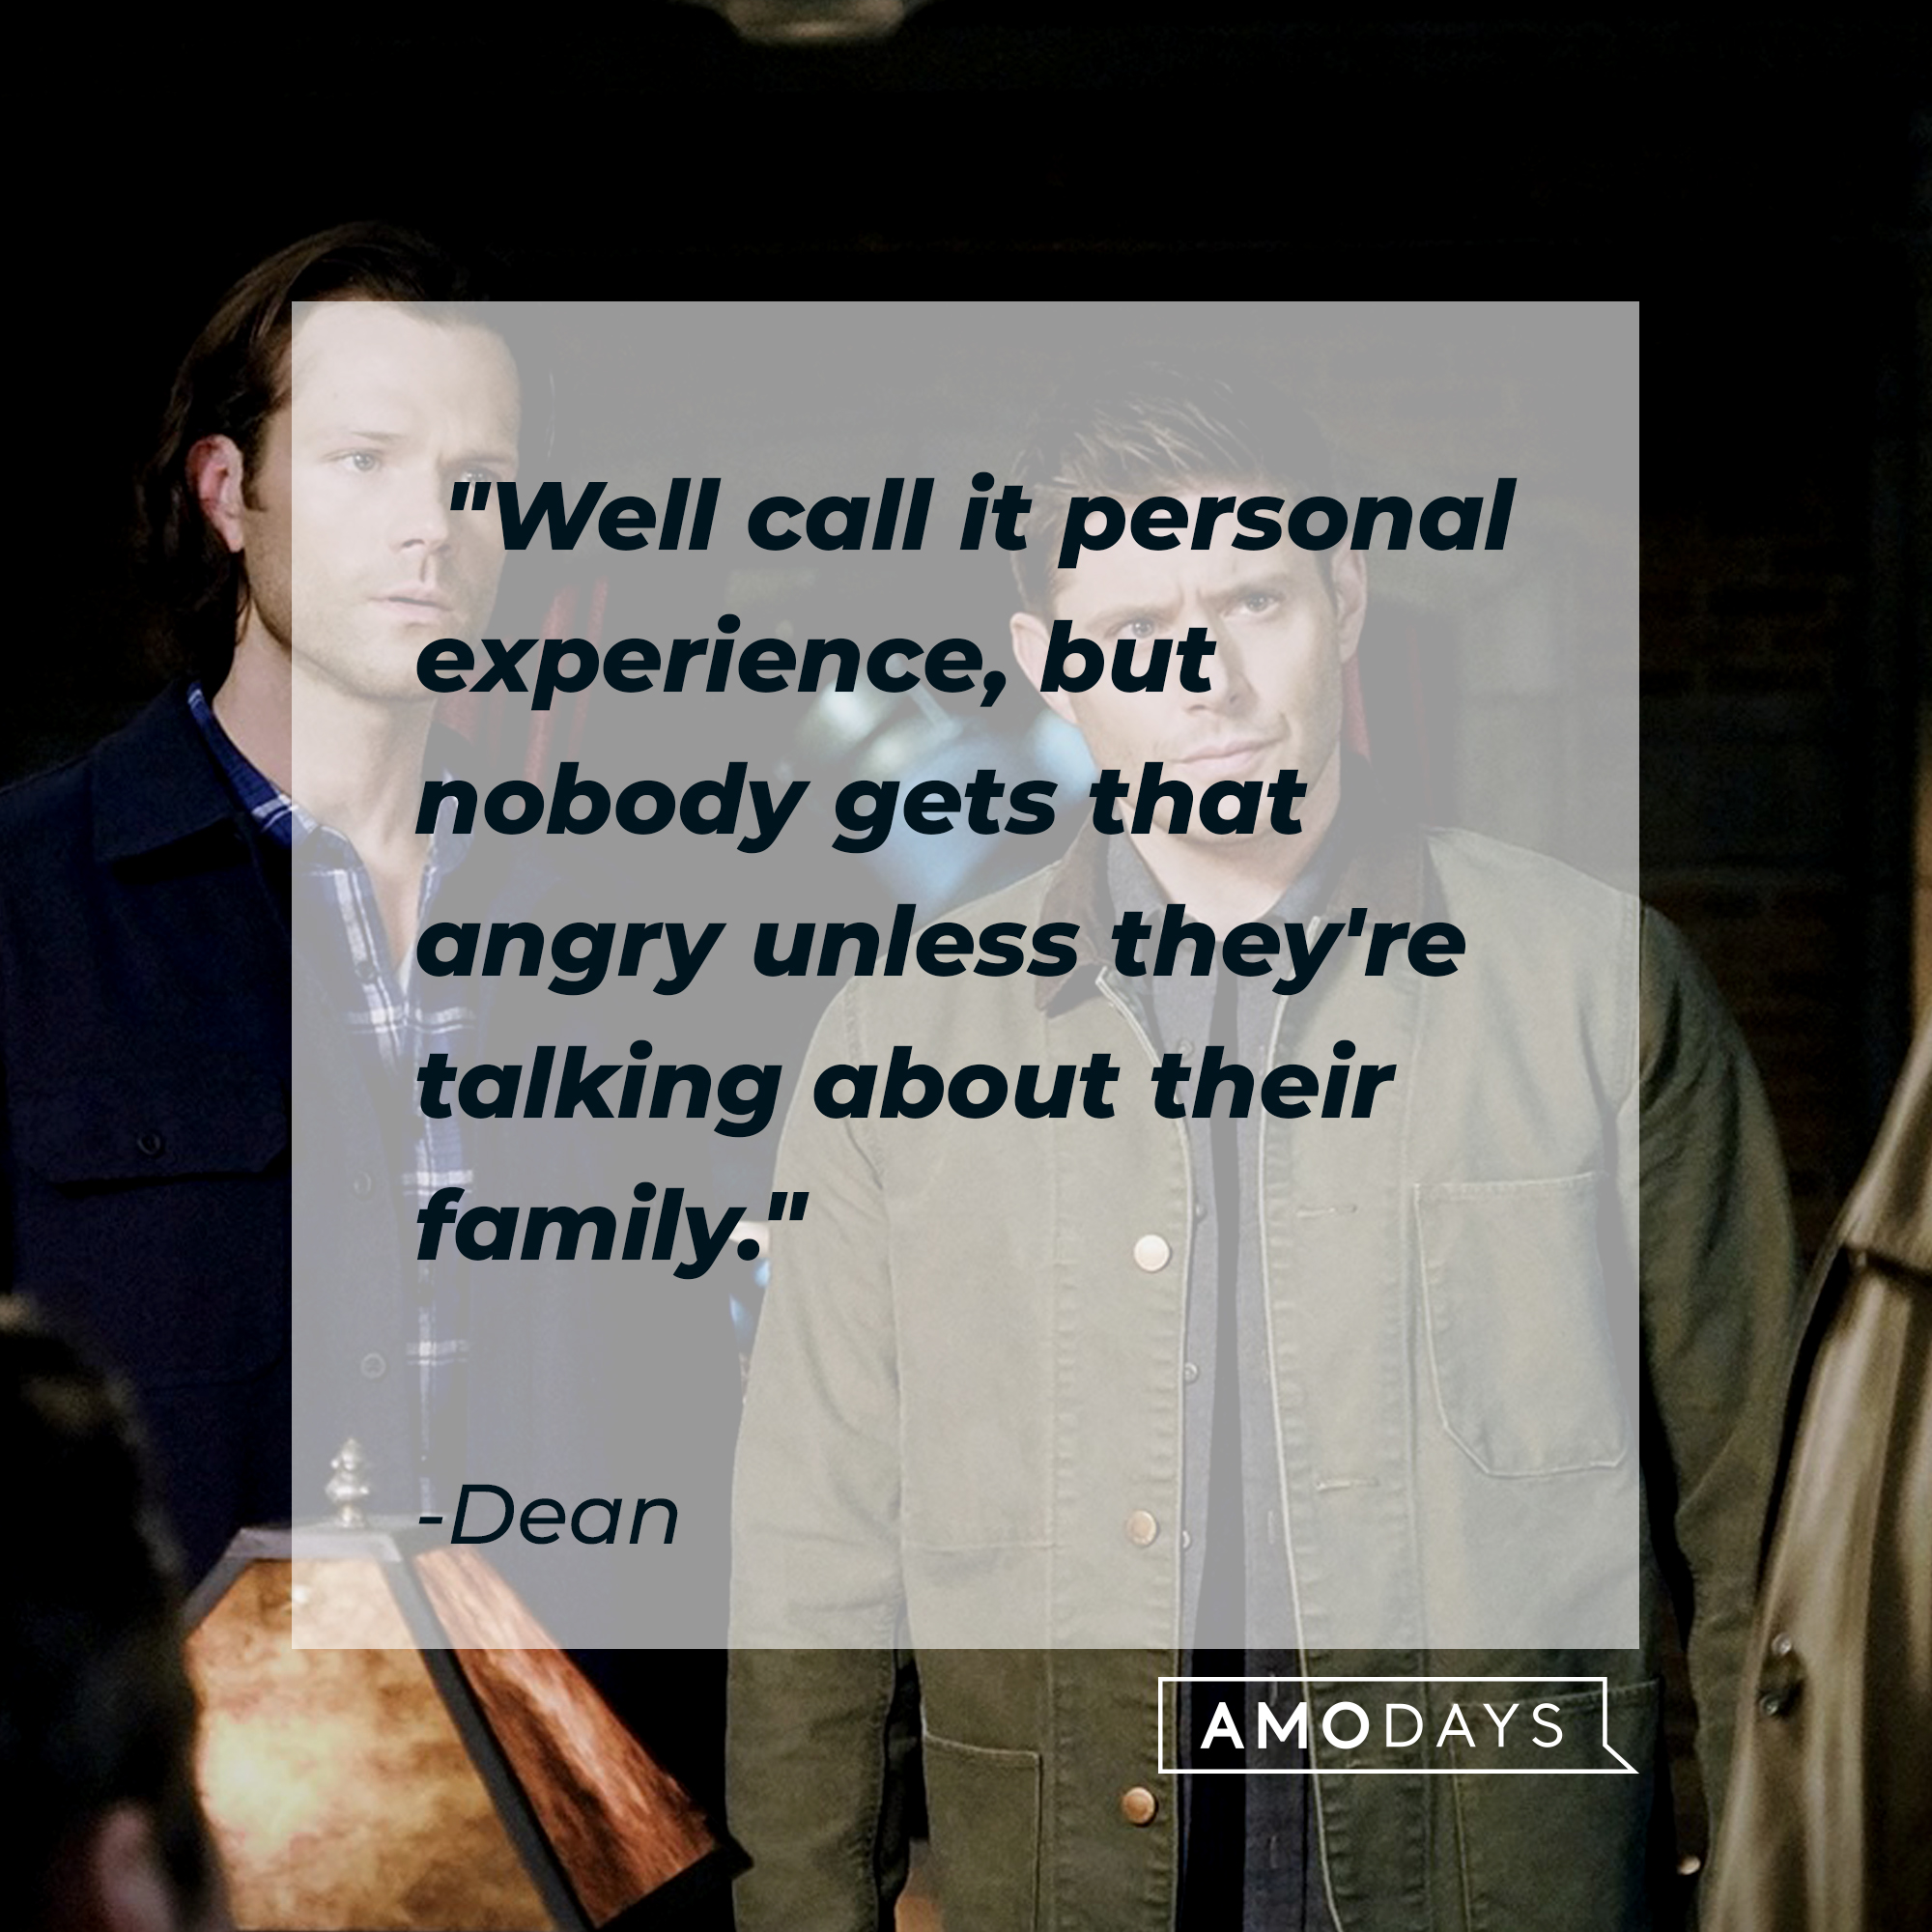 A photo of Sam and Dean Winchester with Dean's quote,  "Well call it personal experience, but nobody gets that angry unless they're talking about their family." | Source: Facebook/Supernatural